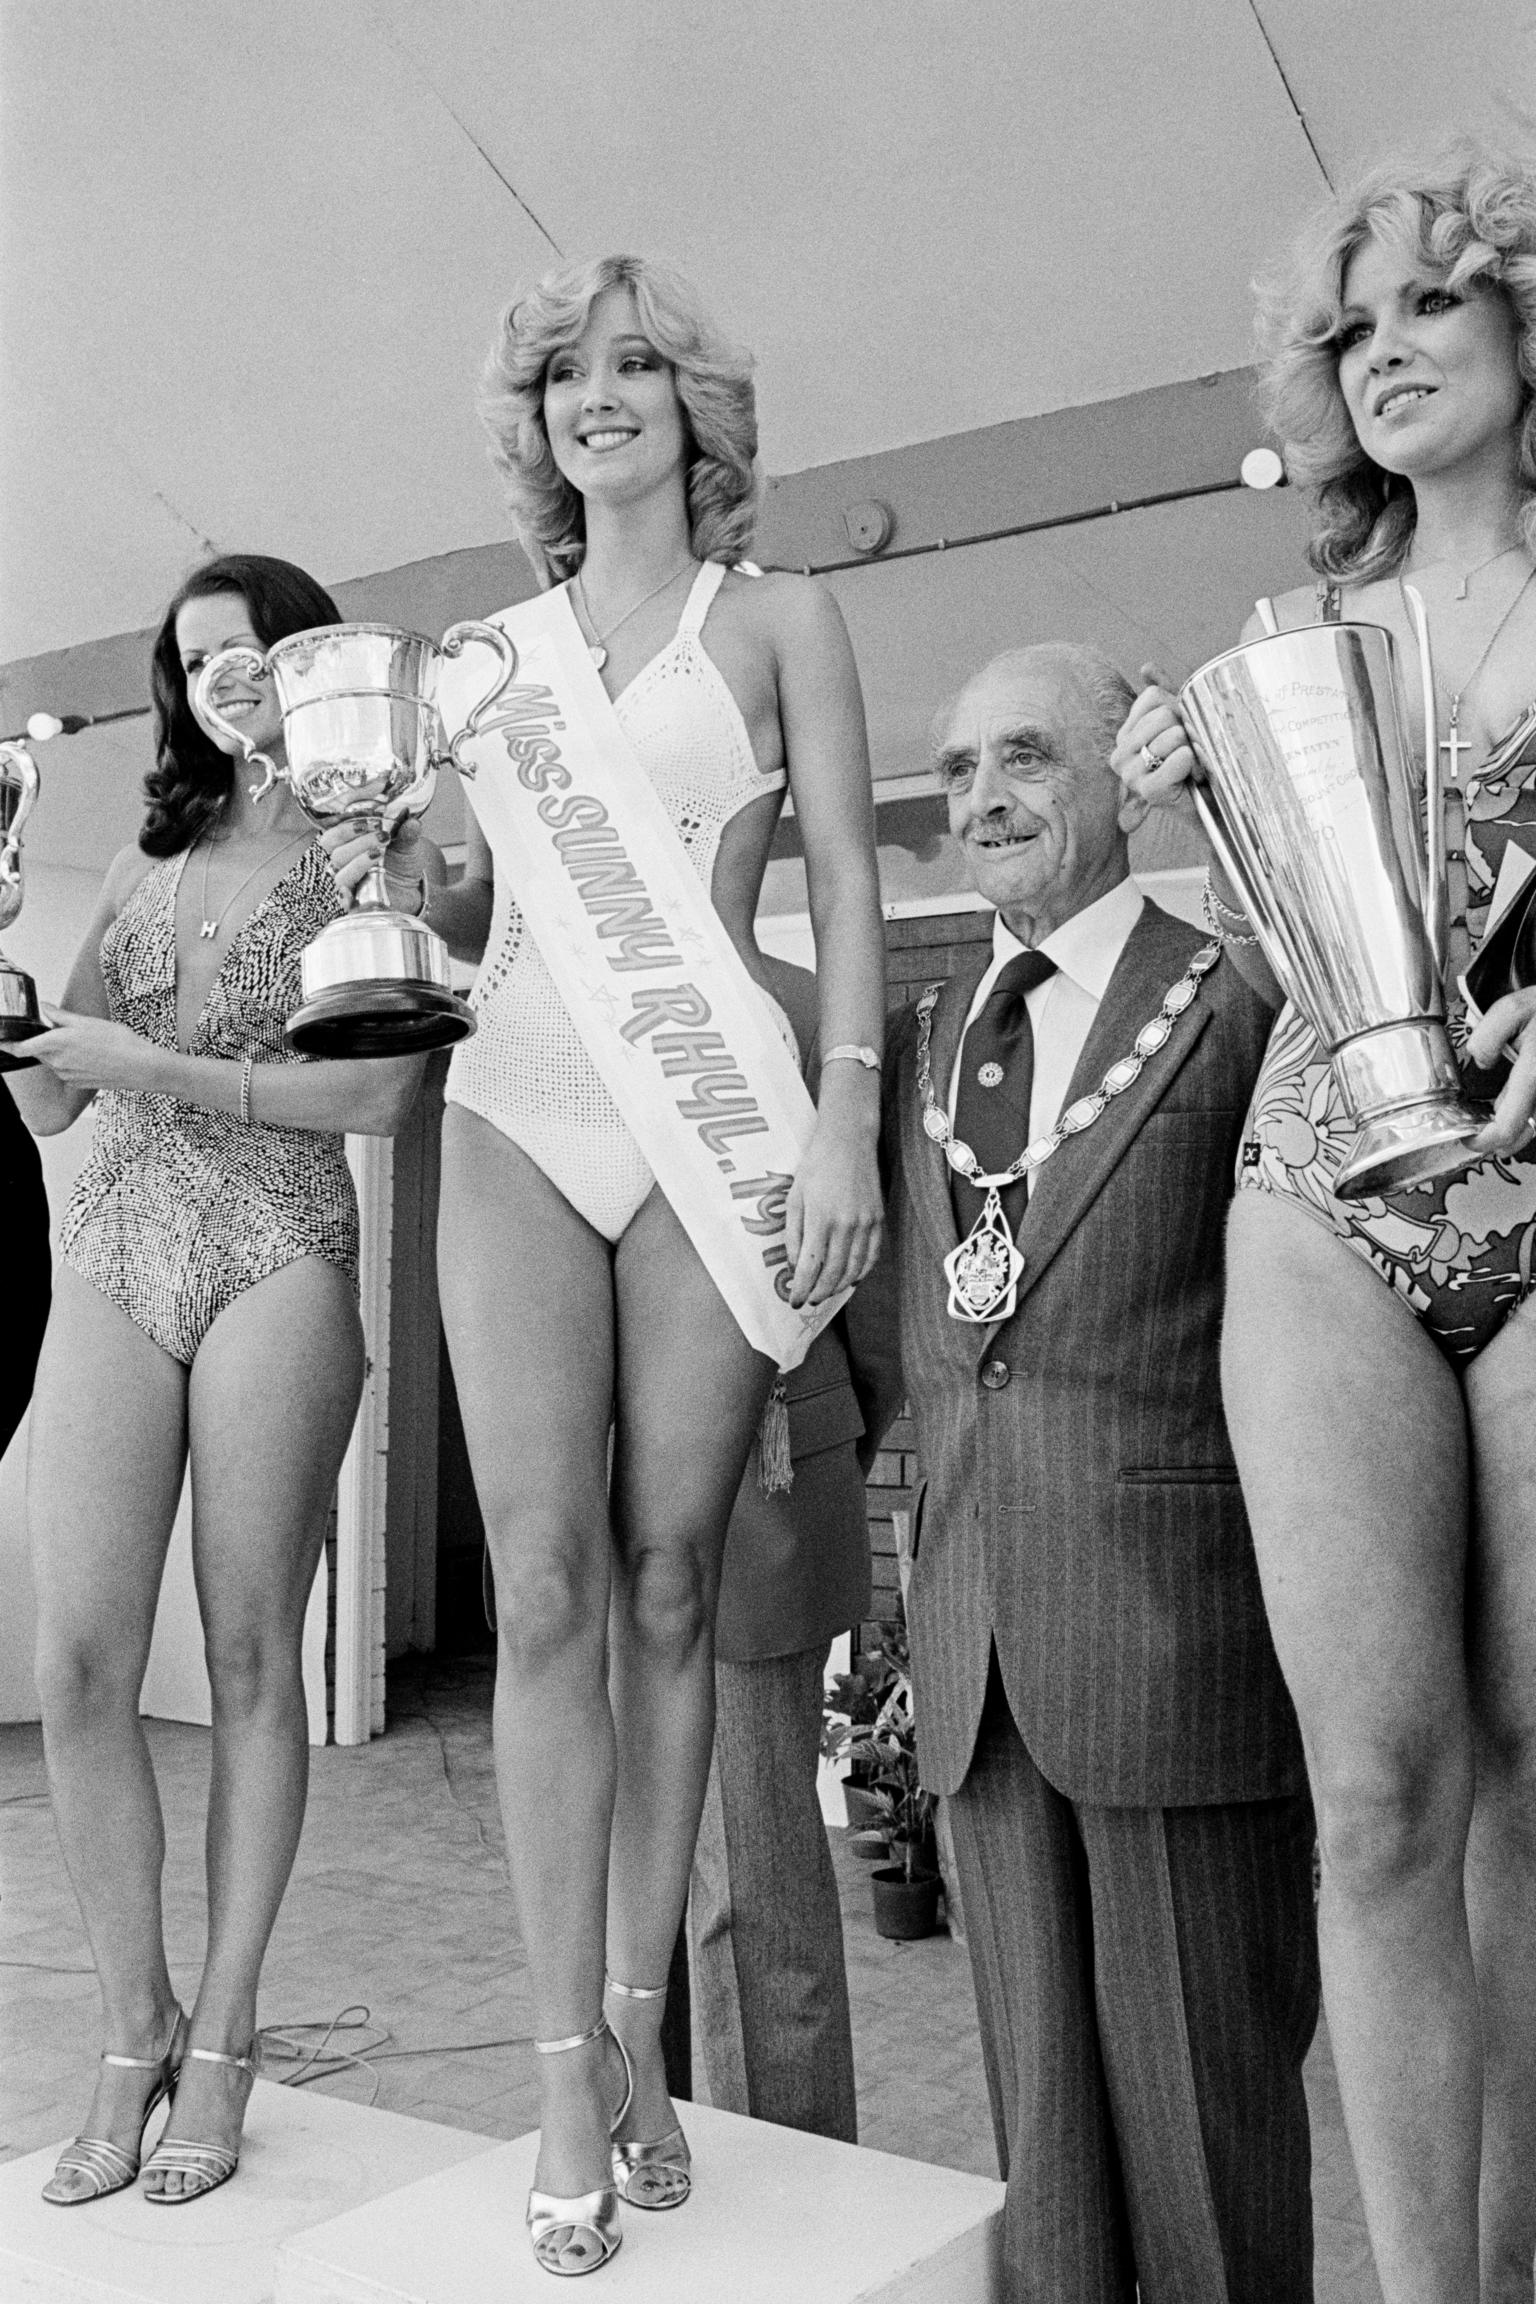 The Mayor and Miss Sunny Rhyl competition. Rhyl, Wales